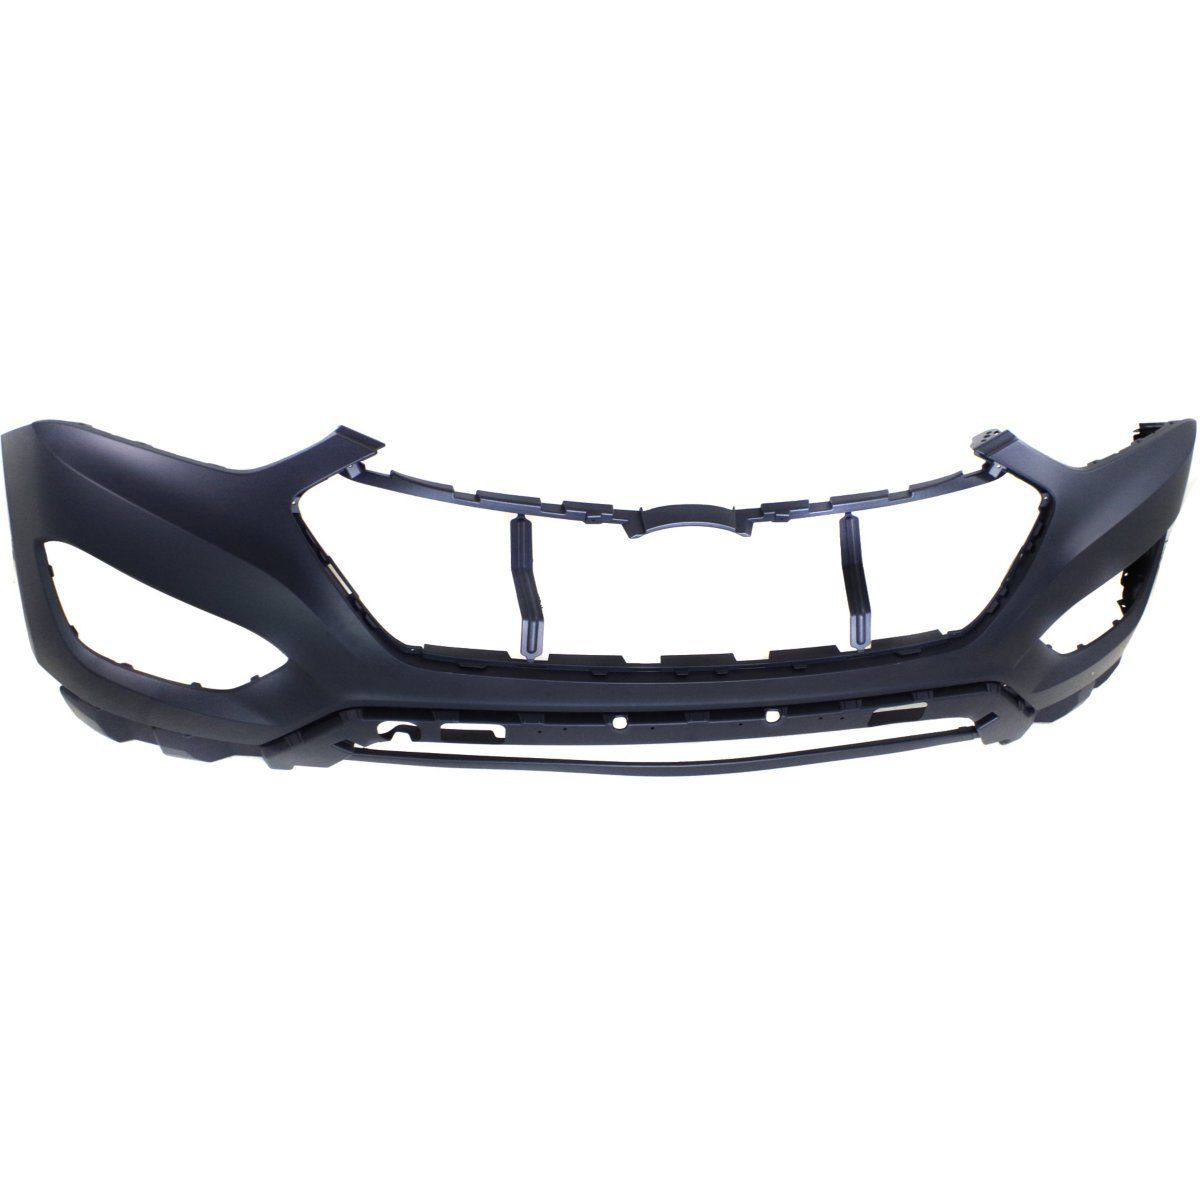 2013-2016 HYUNDAI SANTA FE Front Bumper Cover GLS|LIMITED Painted to Match